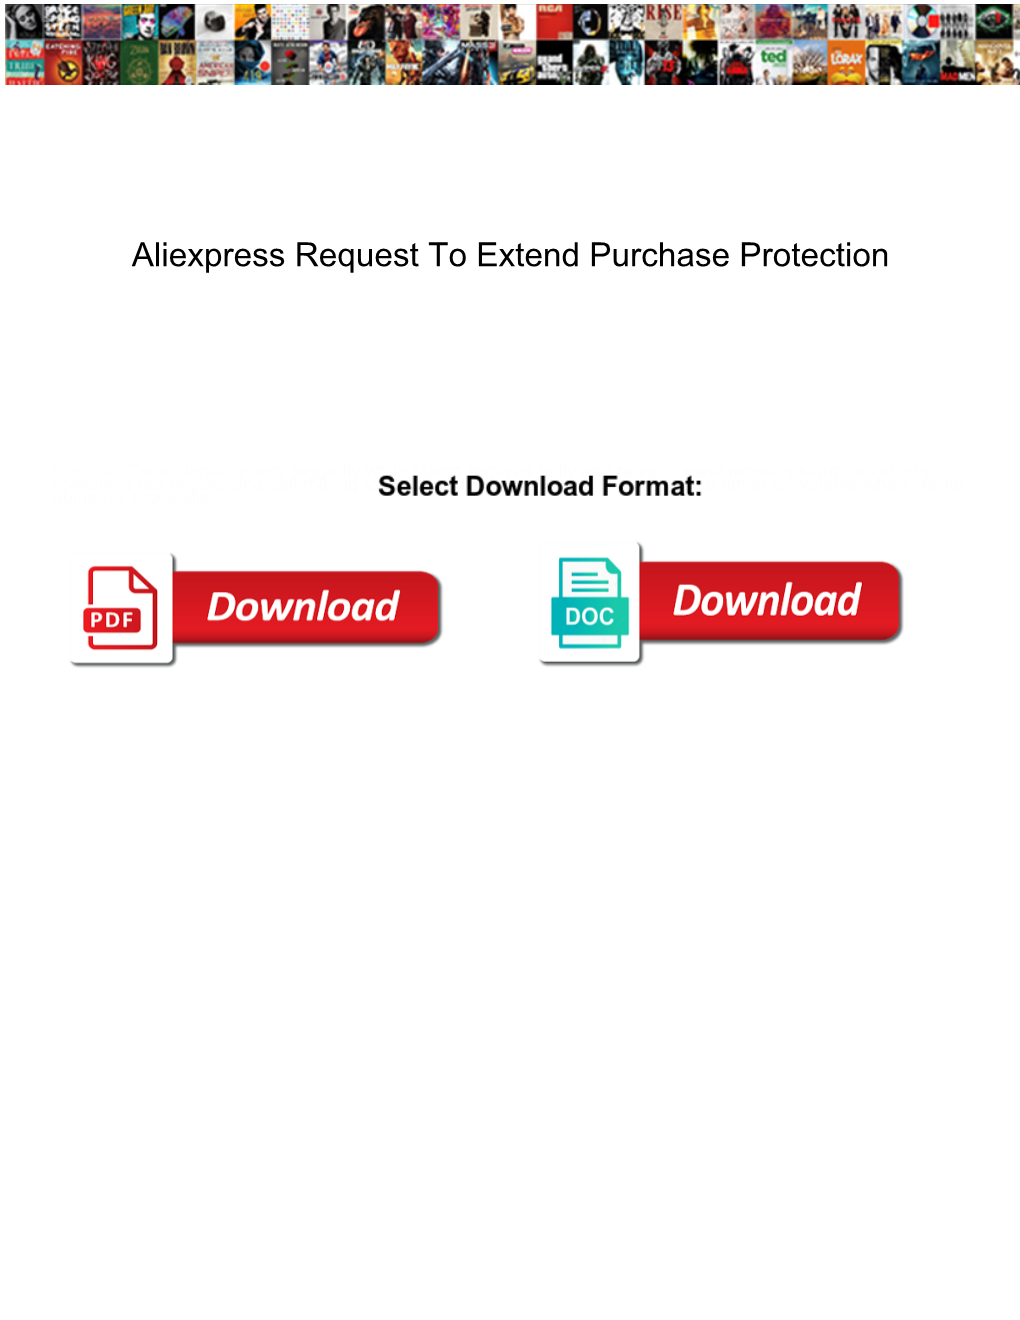 Aliexpress Request to Extend Purchase Protection